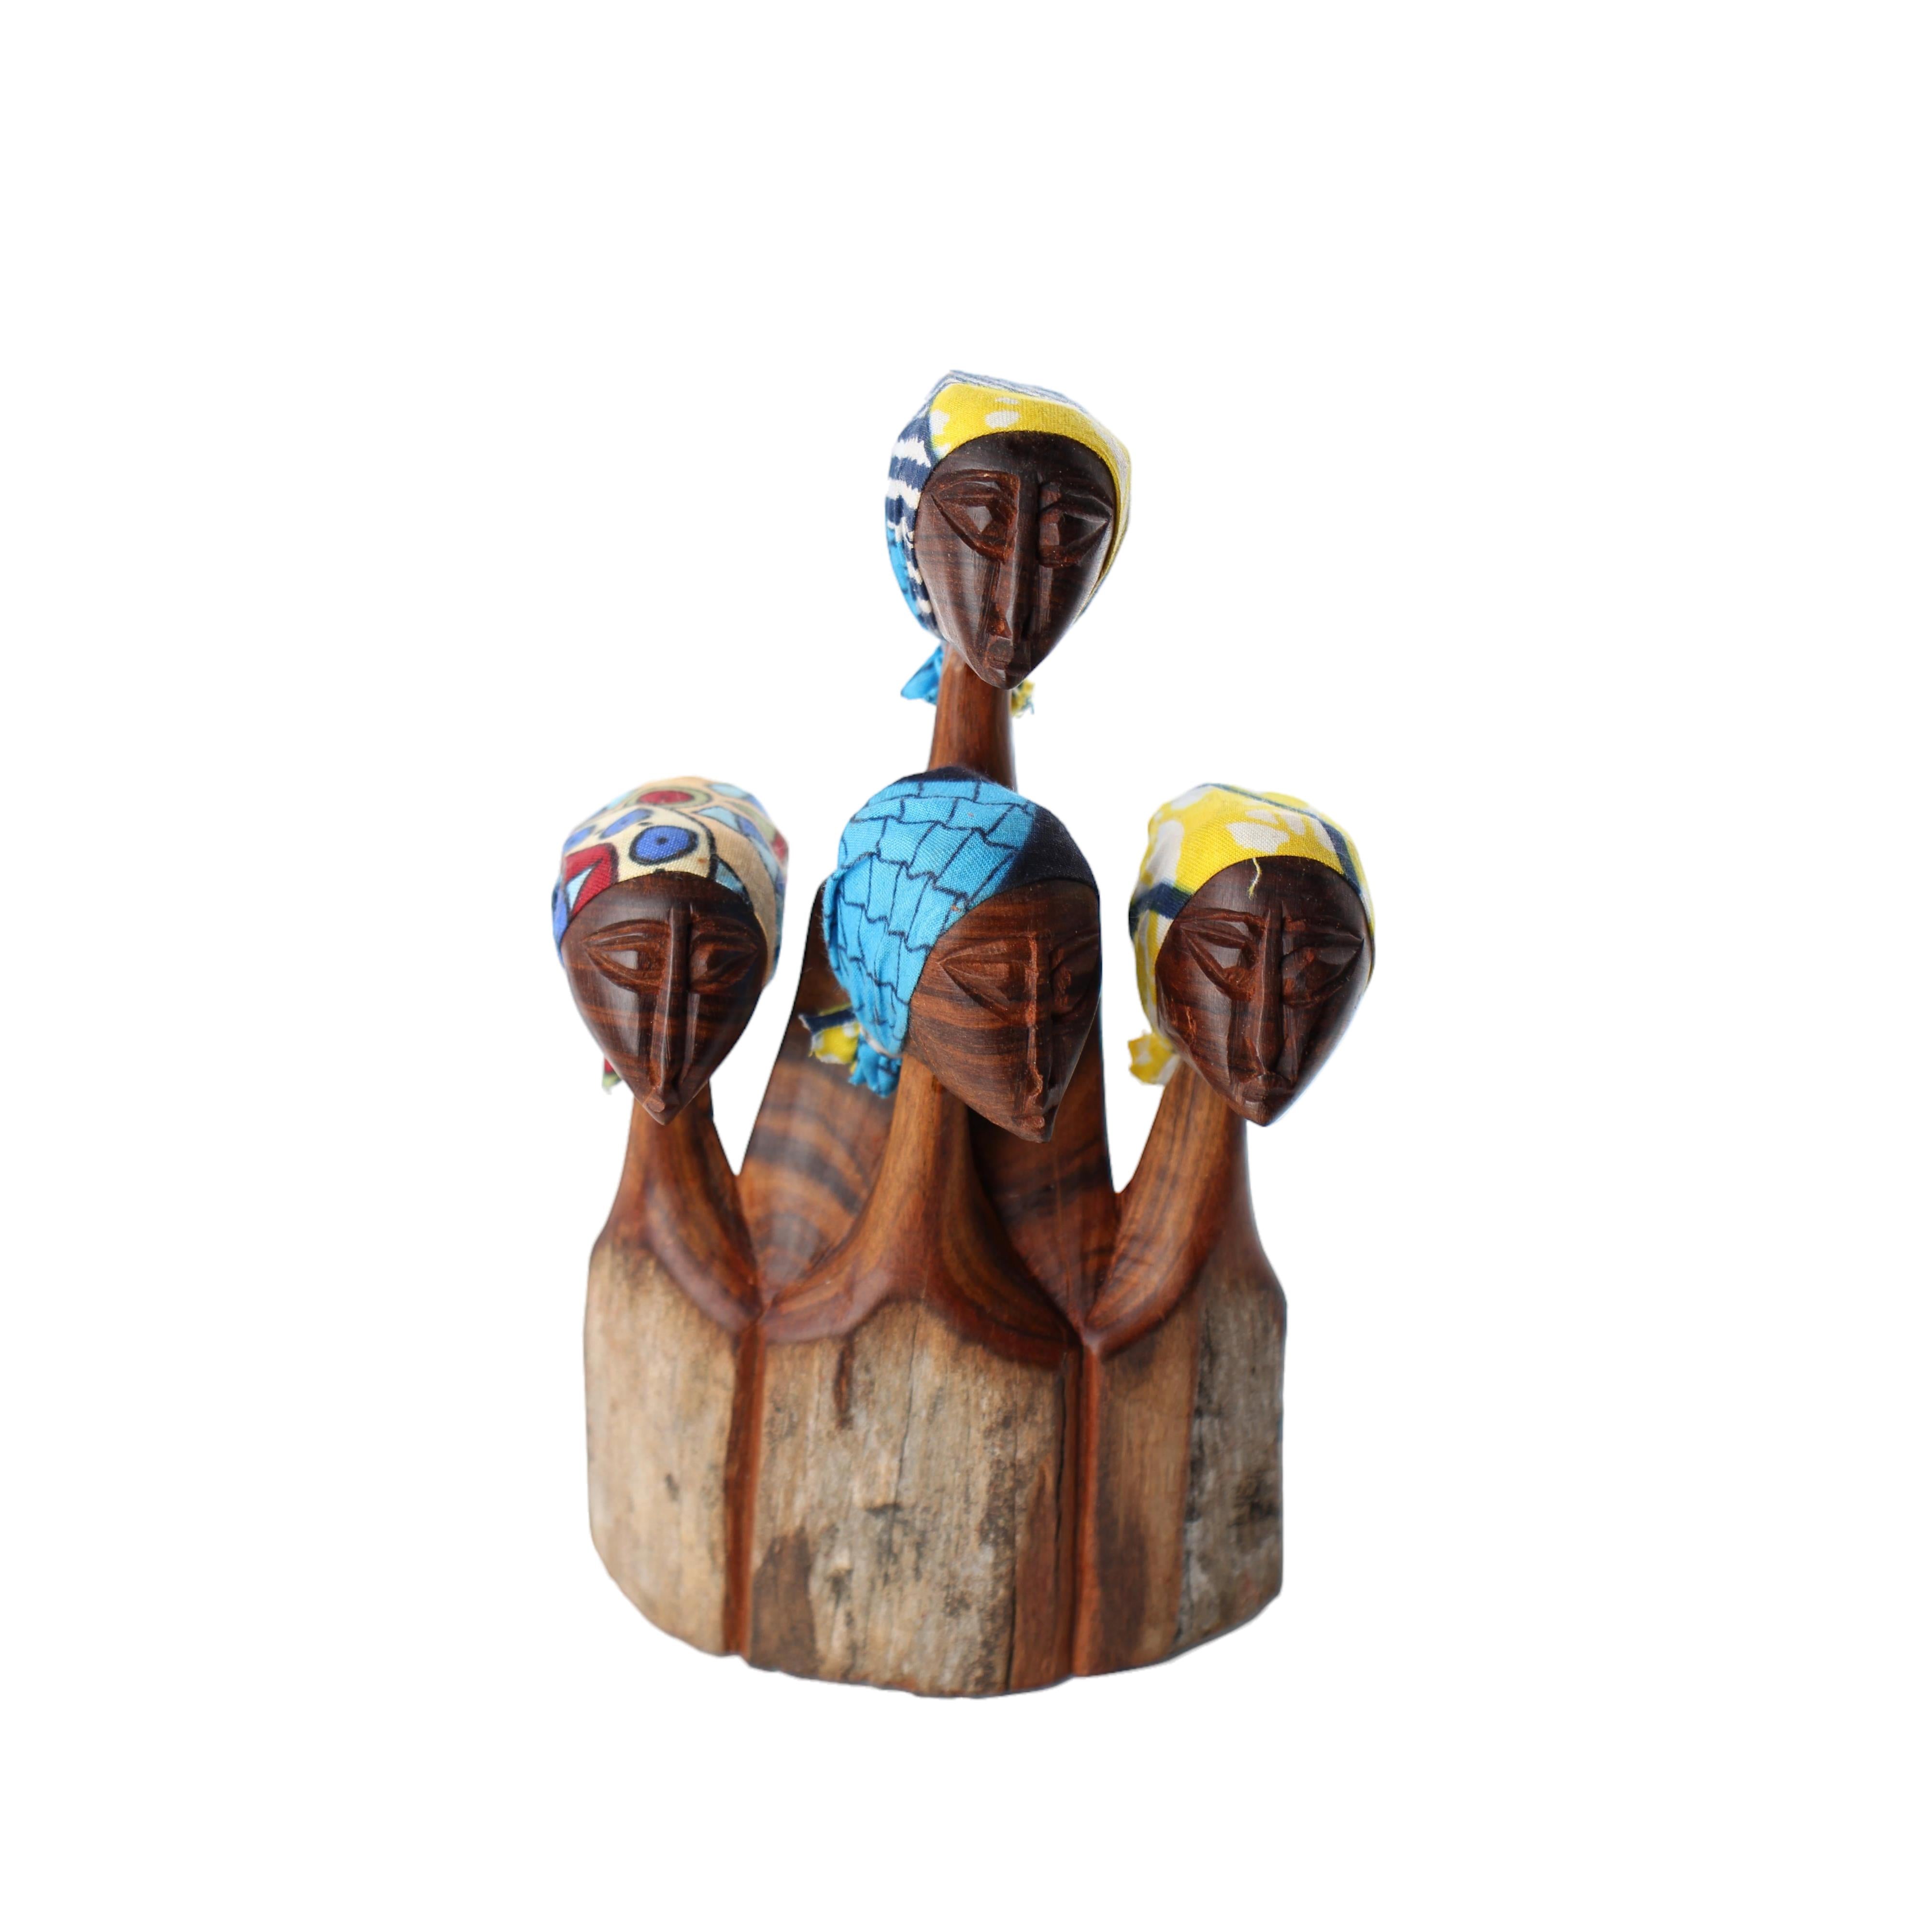 Makonde Tribe Wooden Families ~6.7" Tall - Wooden Families